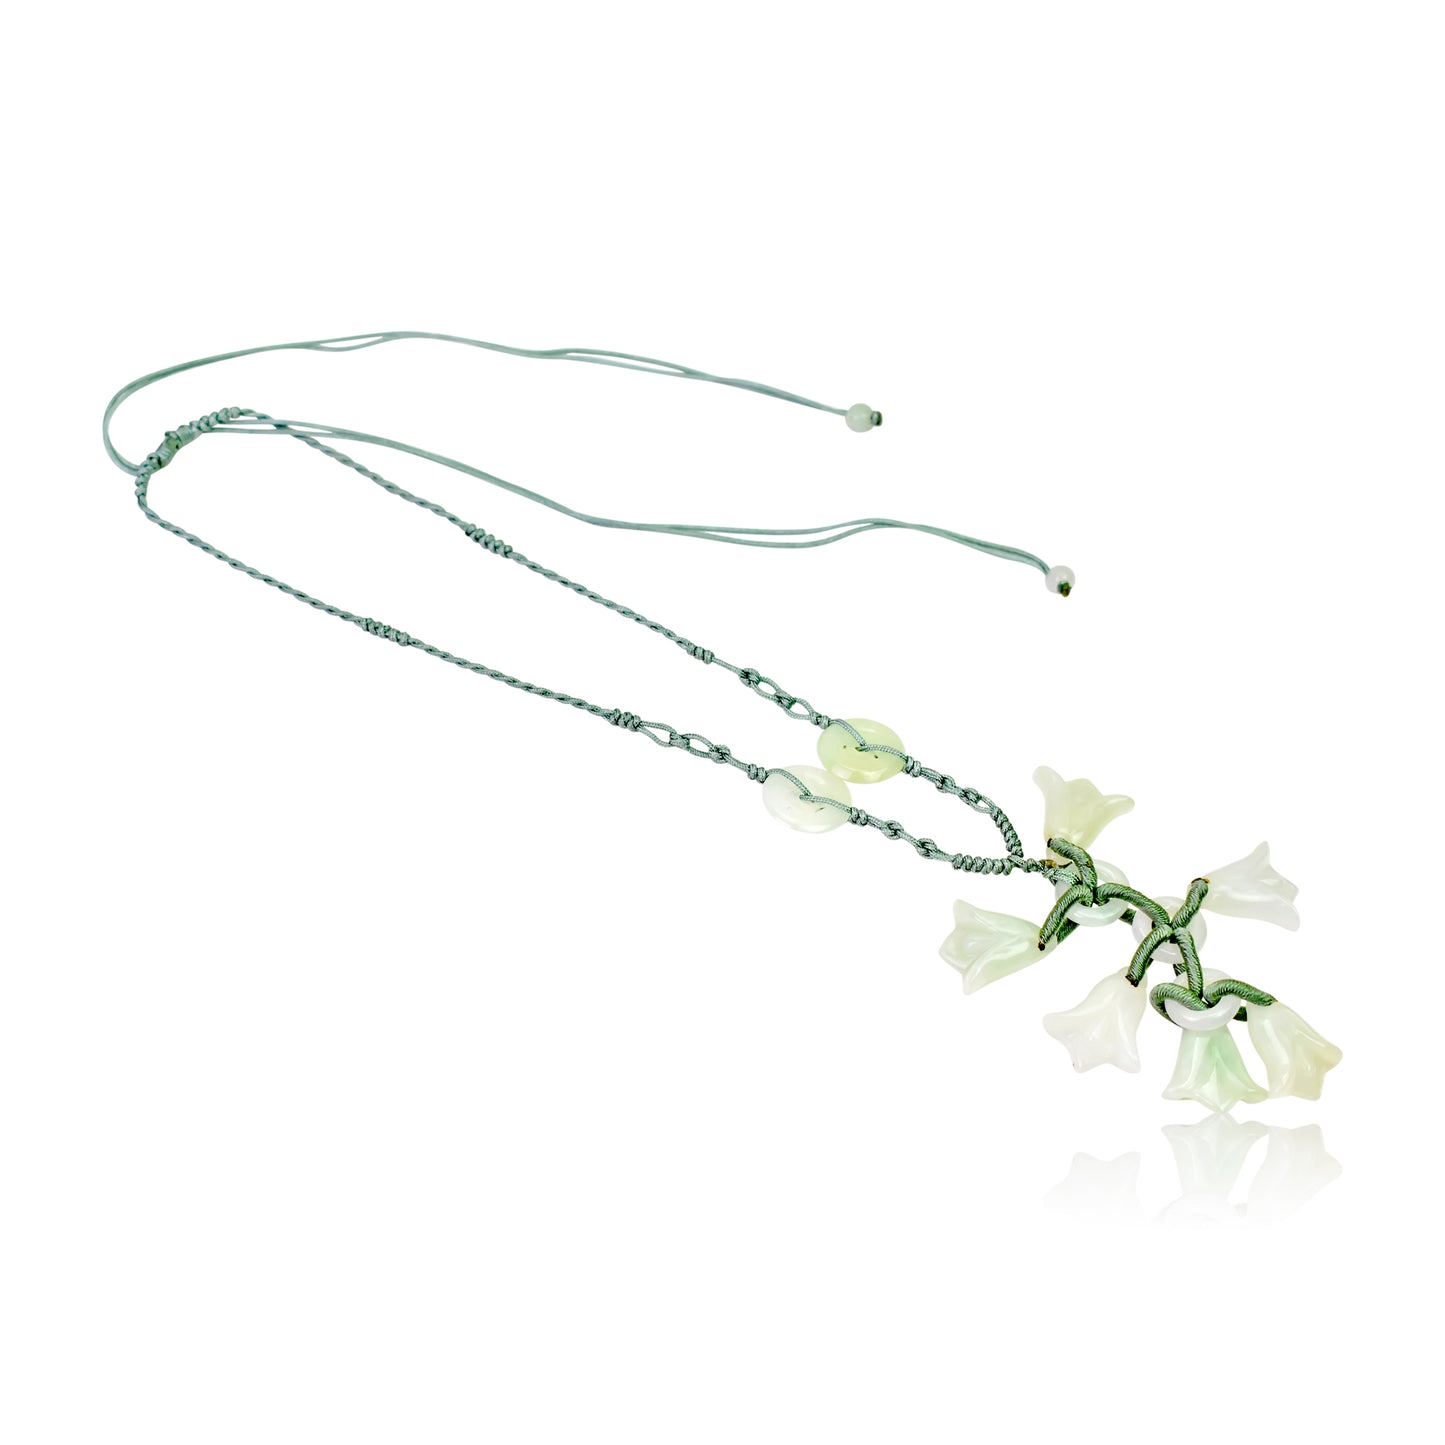 Beautiful and Dainty Bellflower Dangles Handmade Jade Necklace Pendant with Sea Green Cord